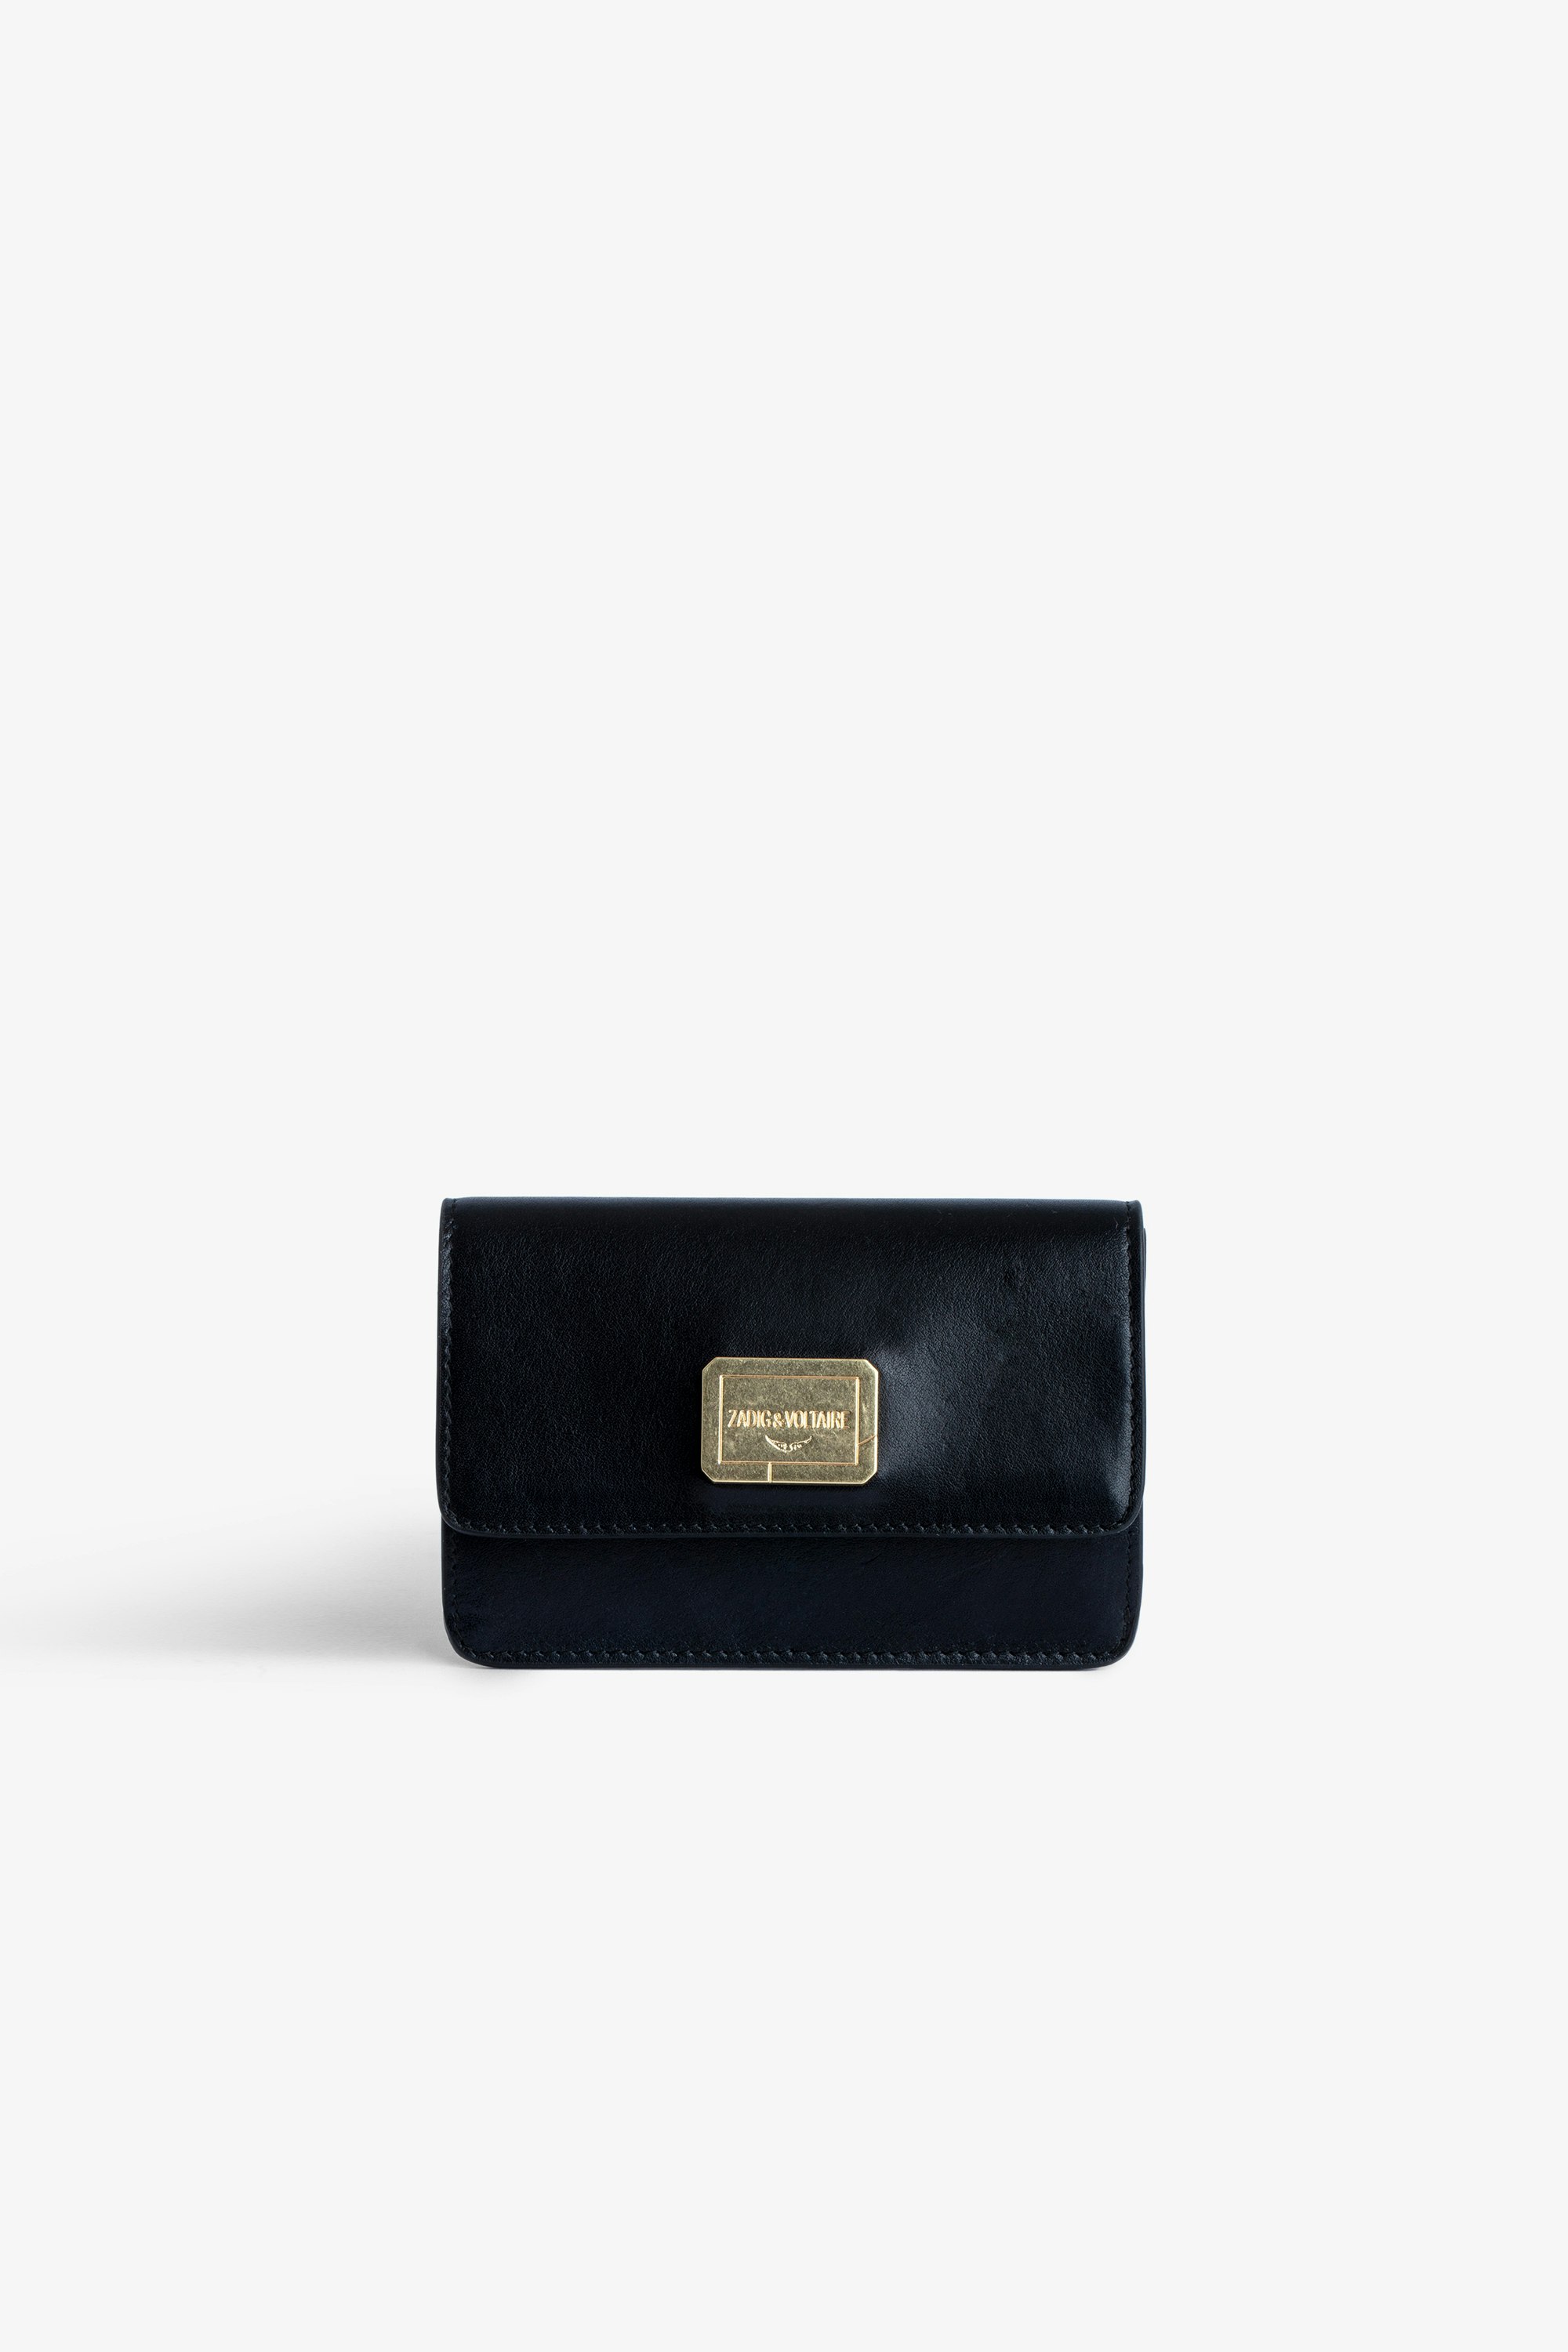 Le Cecilia Wallet Women's navy blue leather wallet with flap 